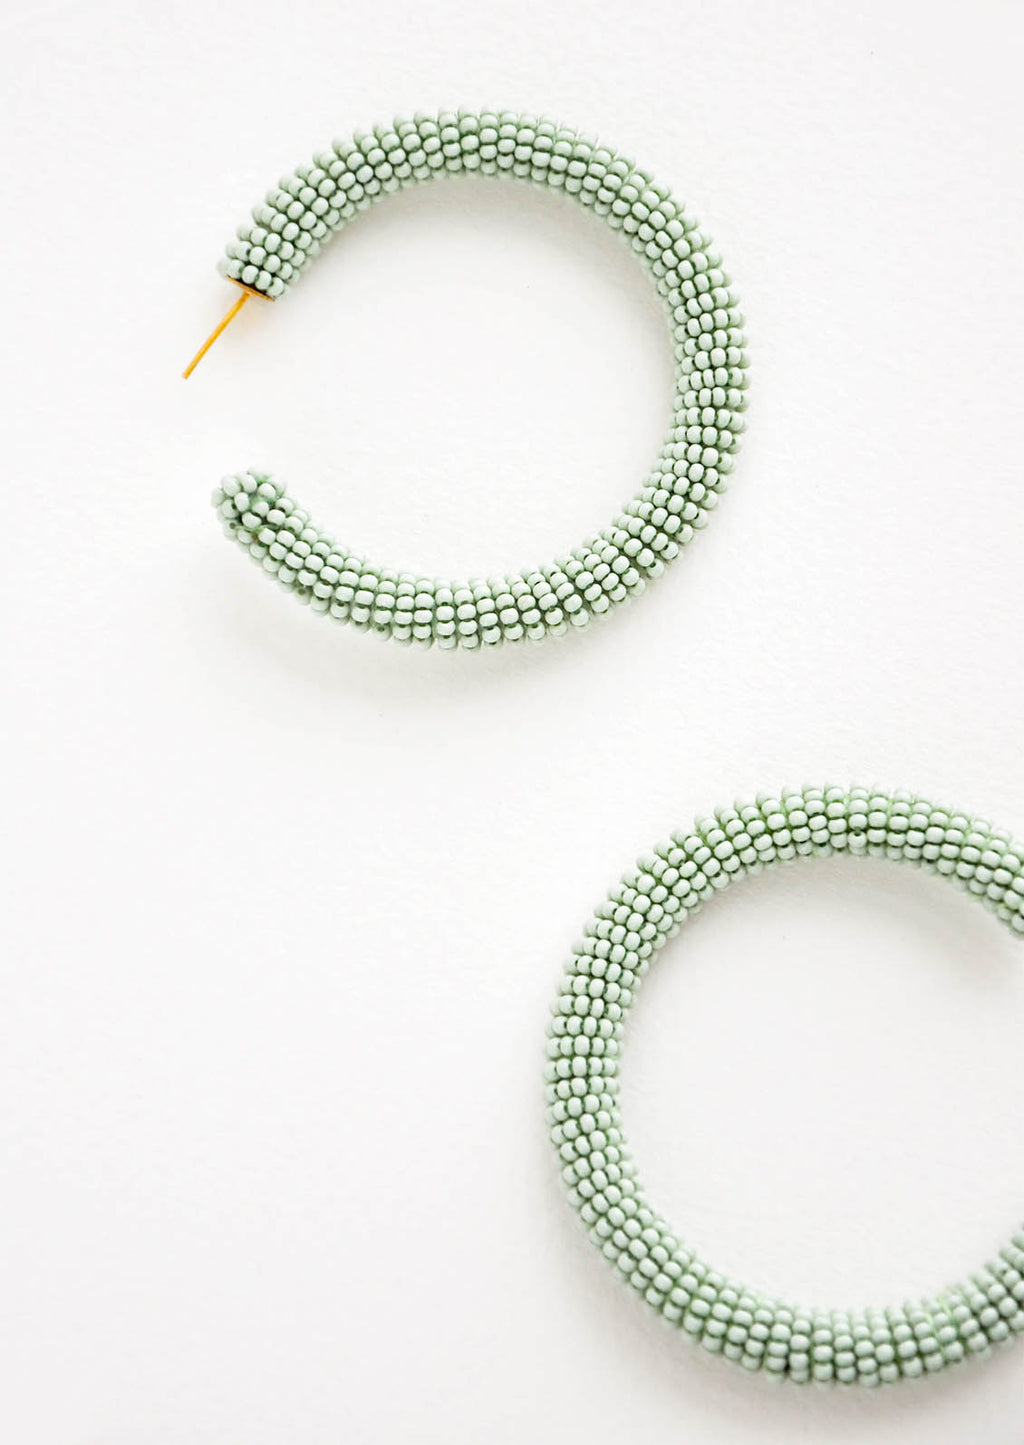 Mint: Thick hoop earrings of mint green colored glass beads.